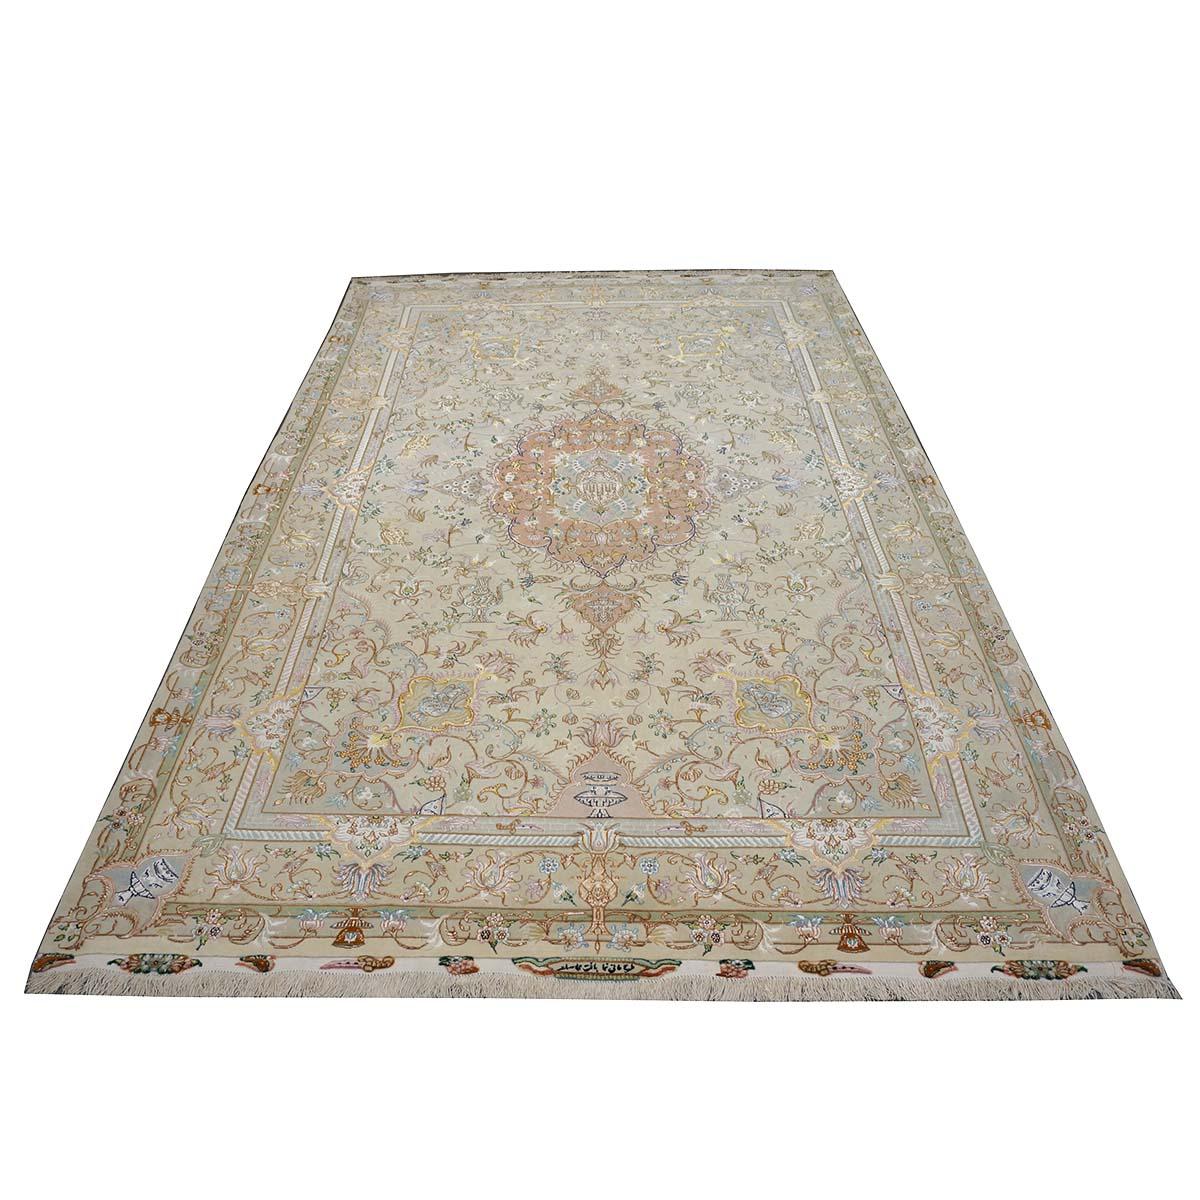 Ashly Fine Rugs presents a 2000s Vintage Persian Tabriz Wool & Silk. Tabriz is a northern city in modern-day Iran and has forever been famous for the fineness and craftsmanship of its handmade rugs. This piece has an amazing ivory background with